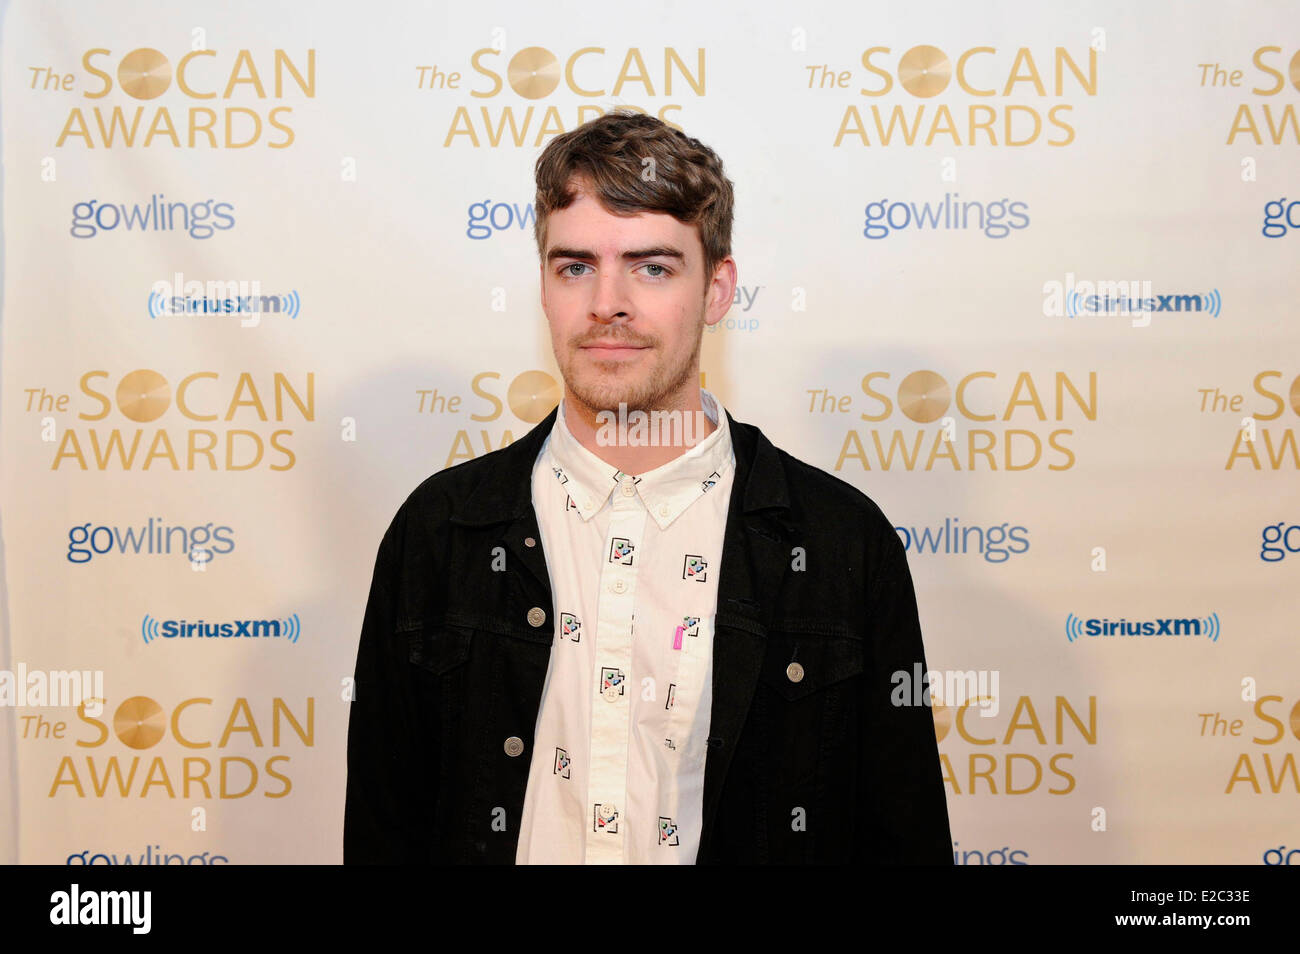 Ryan Hemsworth poses for photo at the 25th SOCAN Awards (Society of Composers, Authors and Music Publishers of Canada). Stock Photo